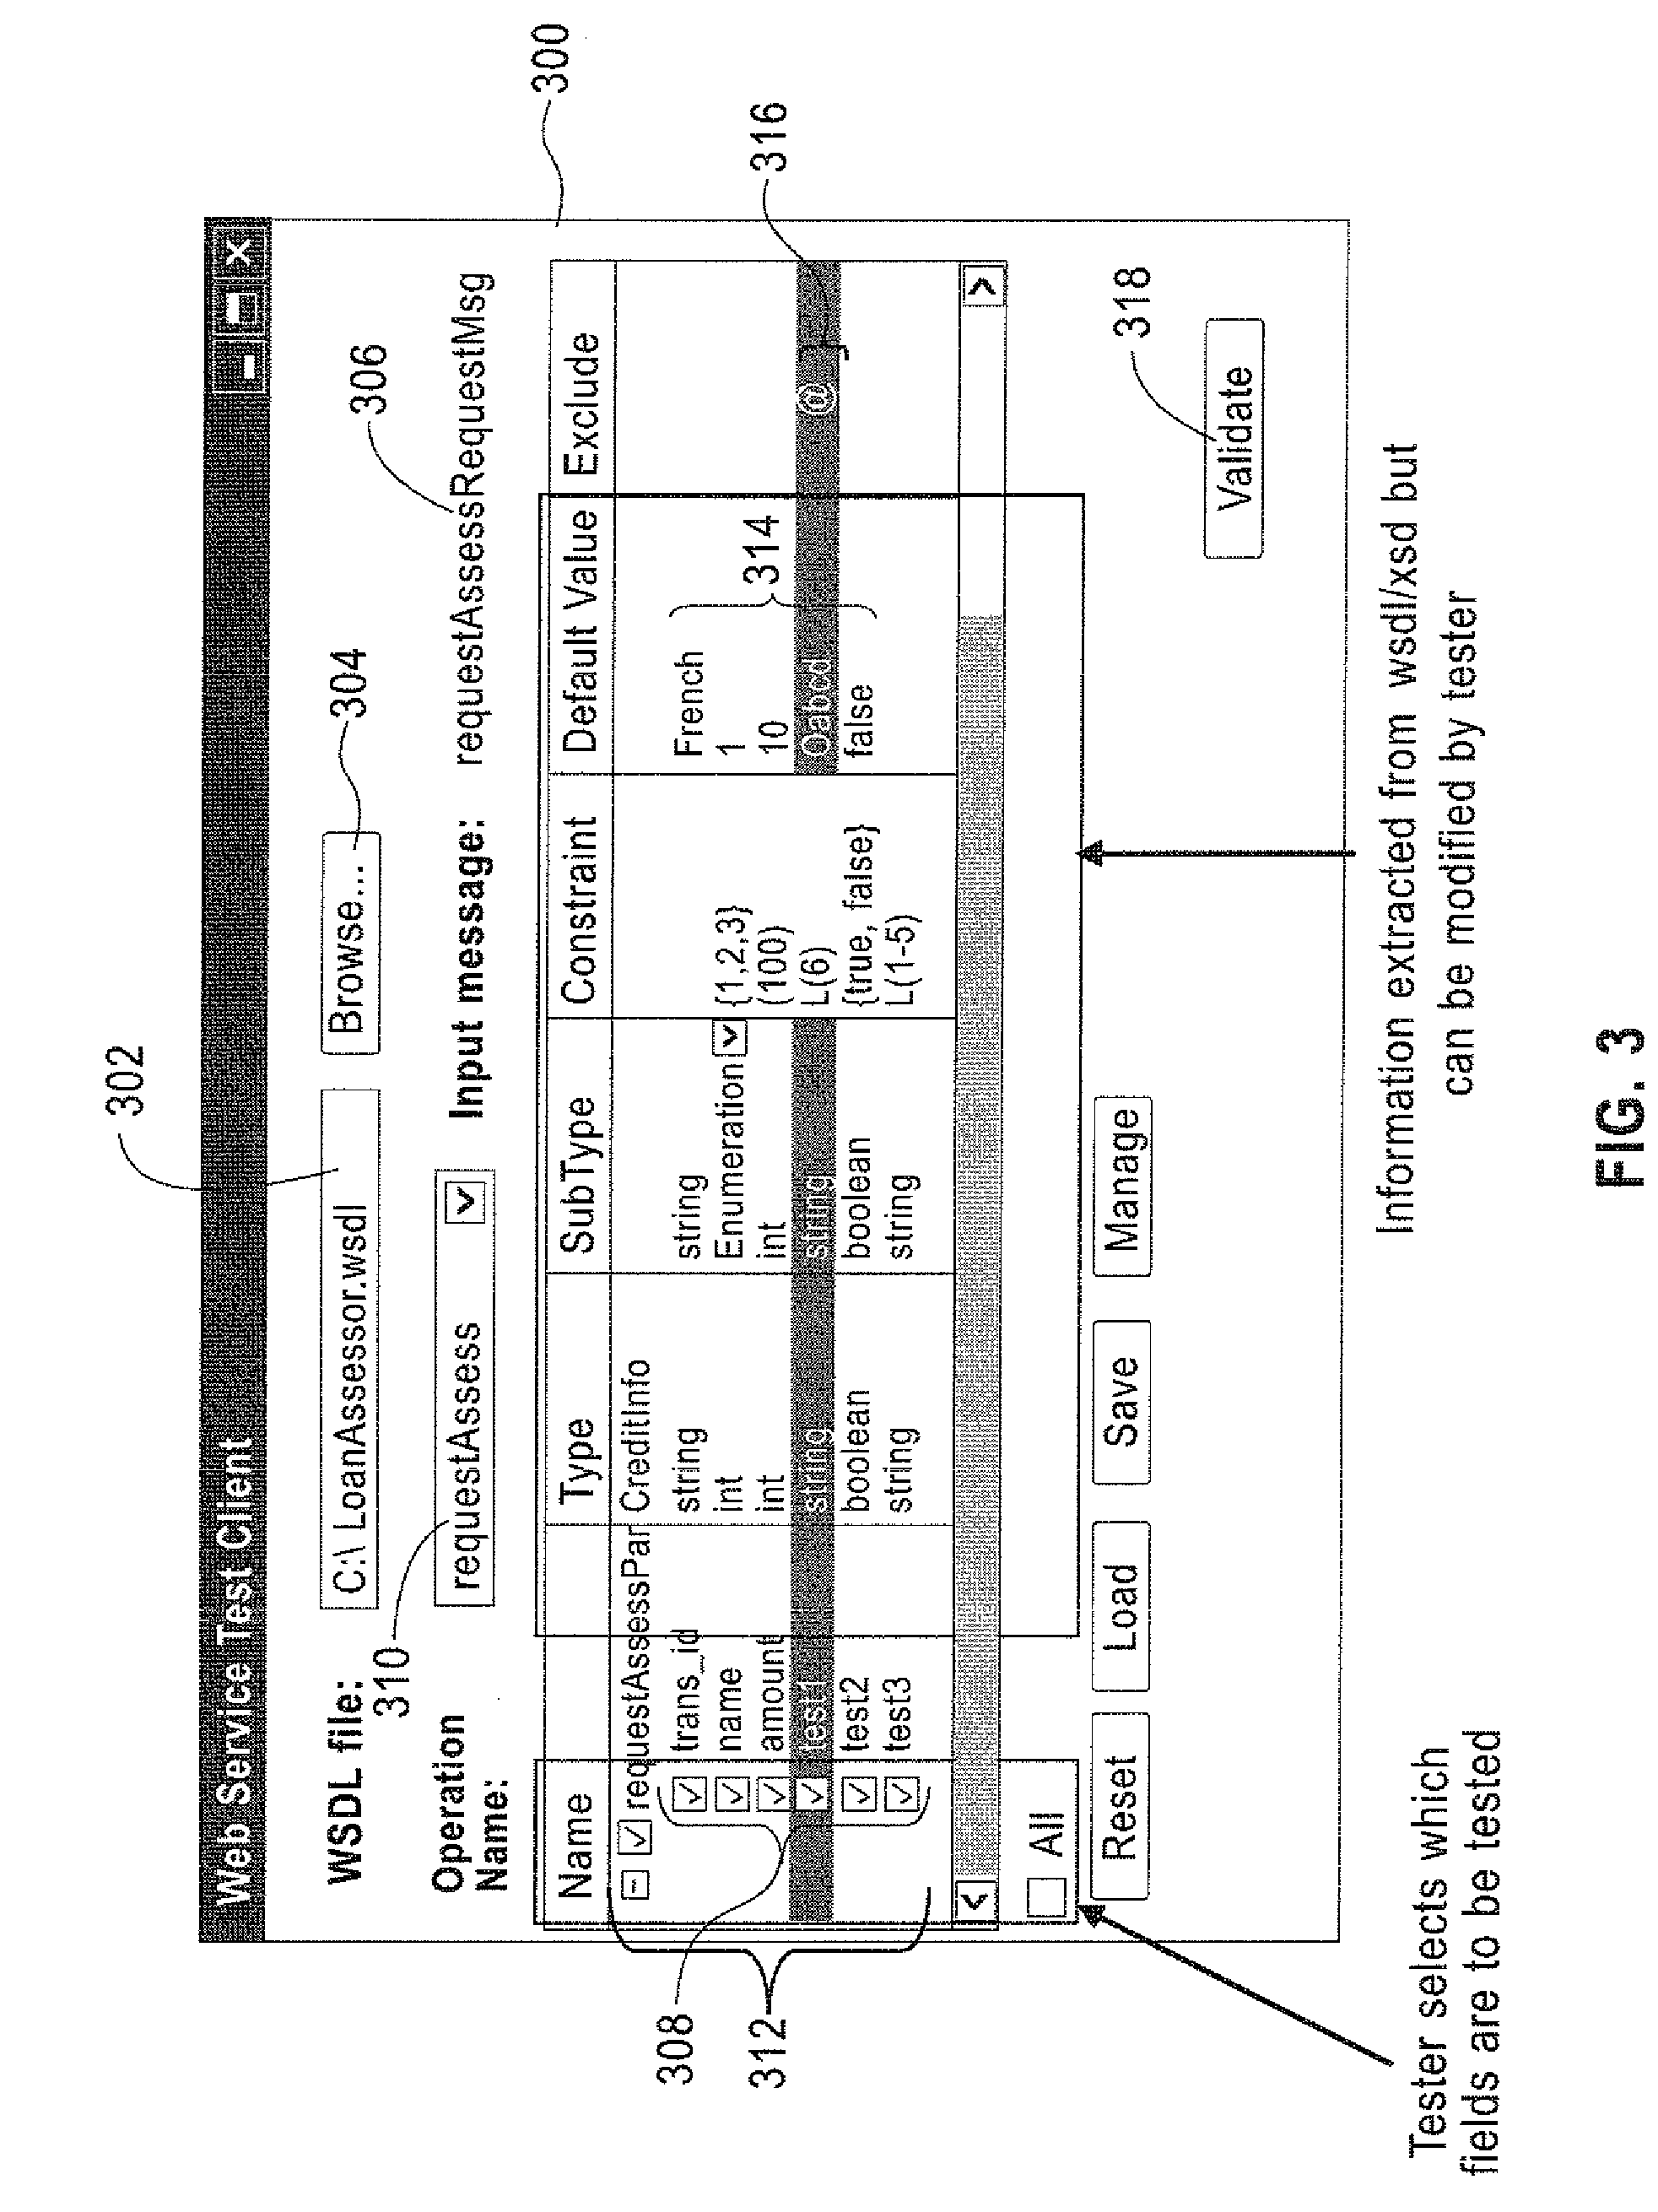 Method and apparatus of effective functional test data generation for web service testing